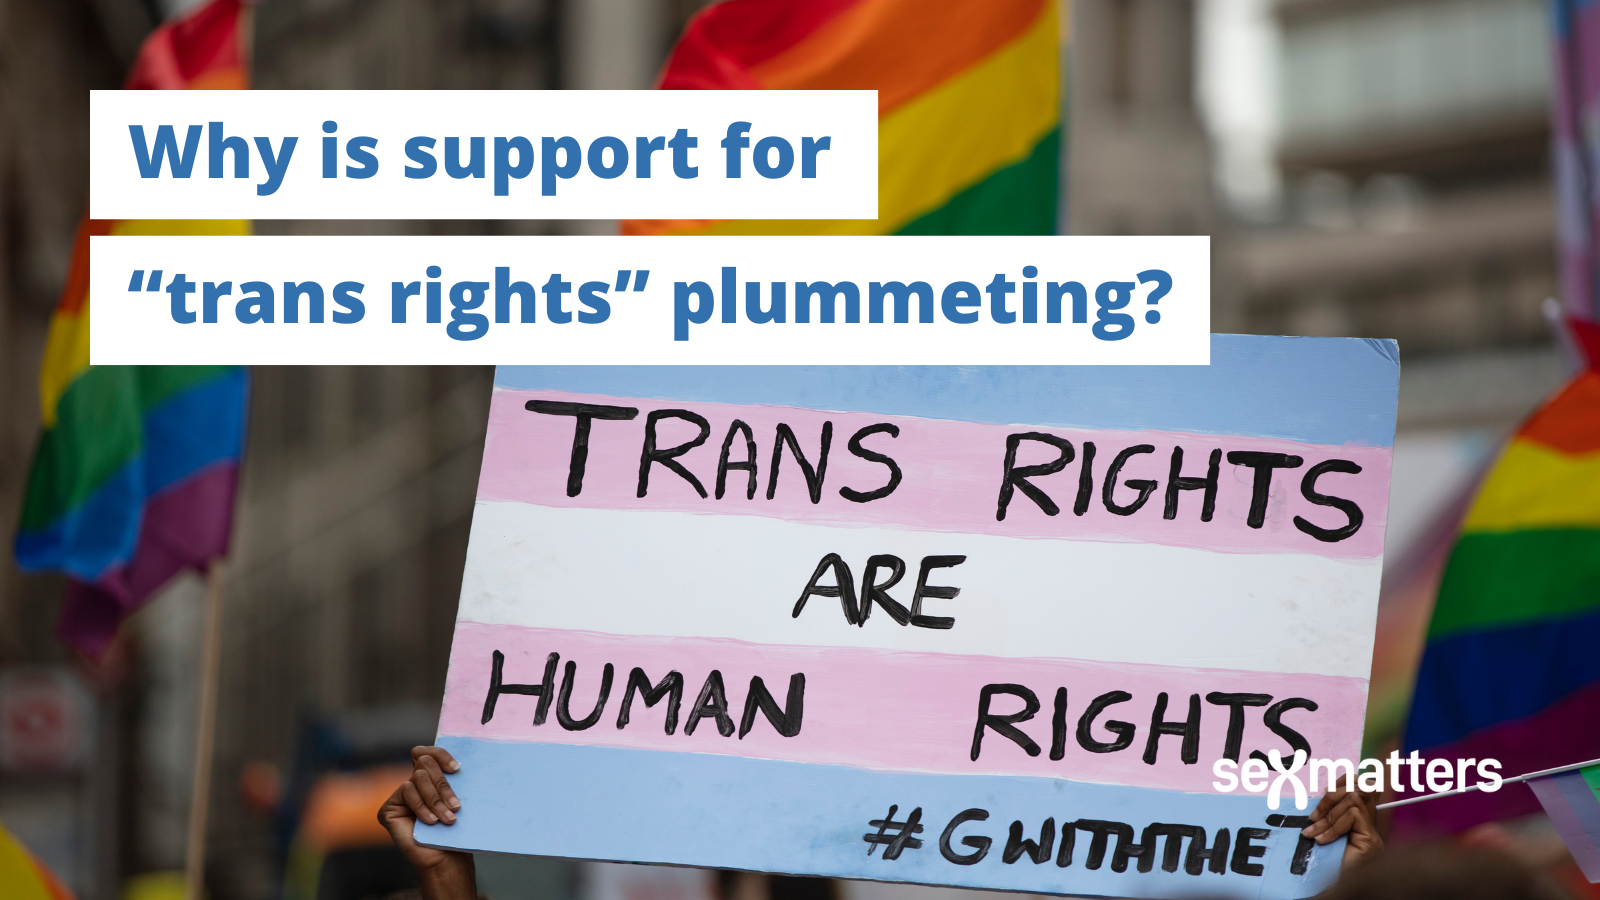 Why is support for “trans rights” plummeting?